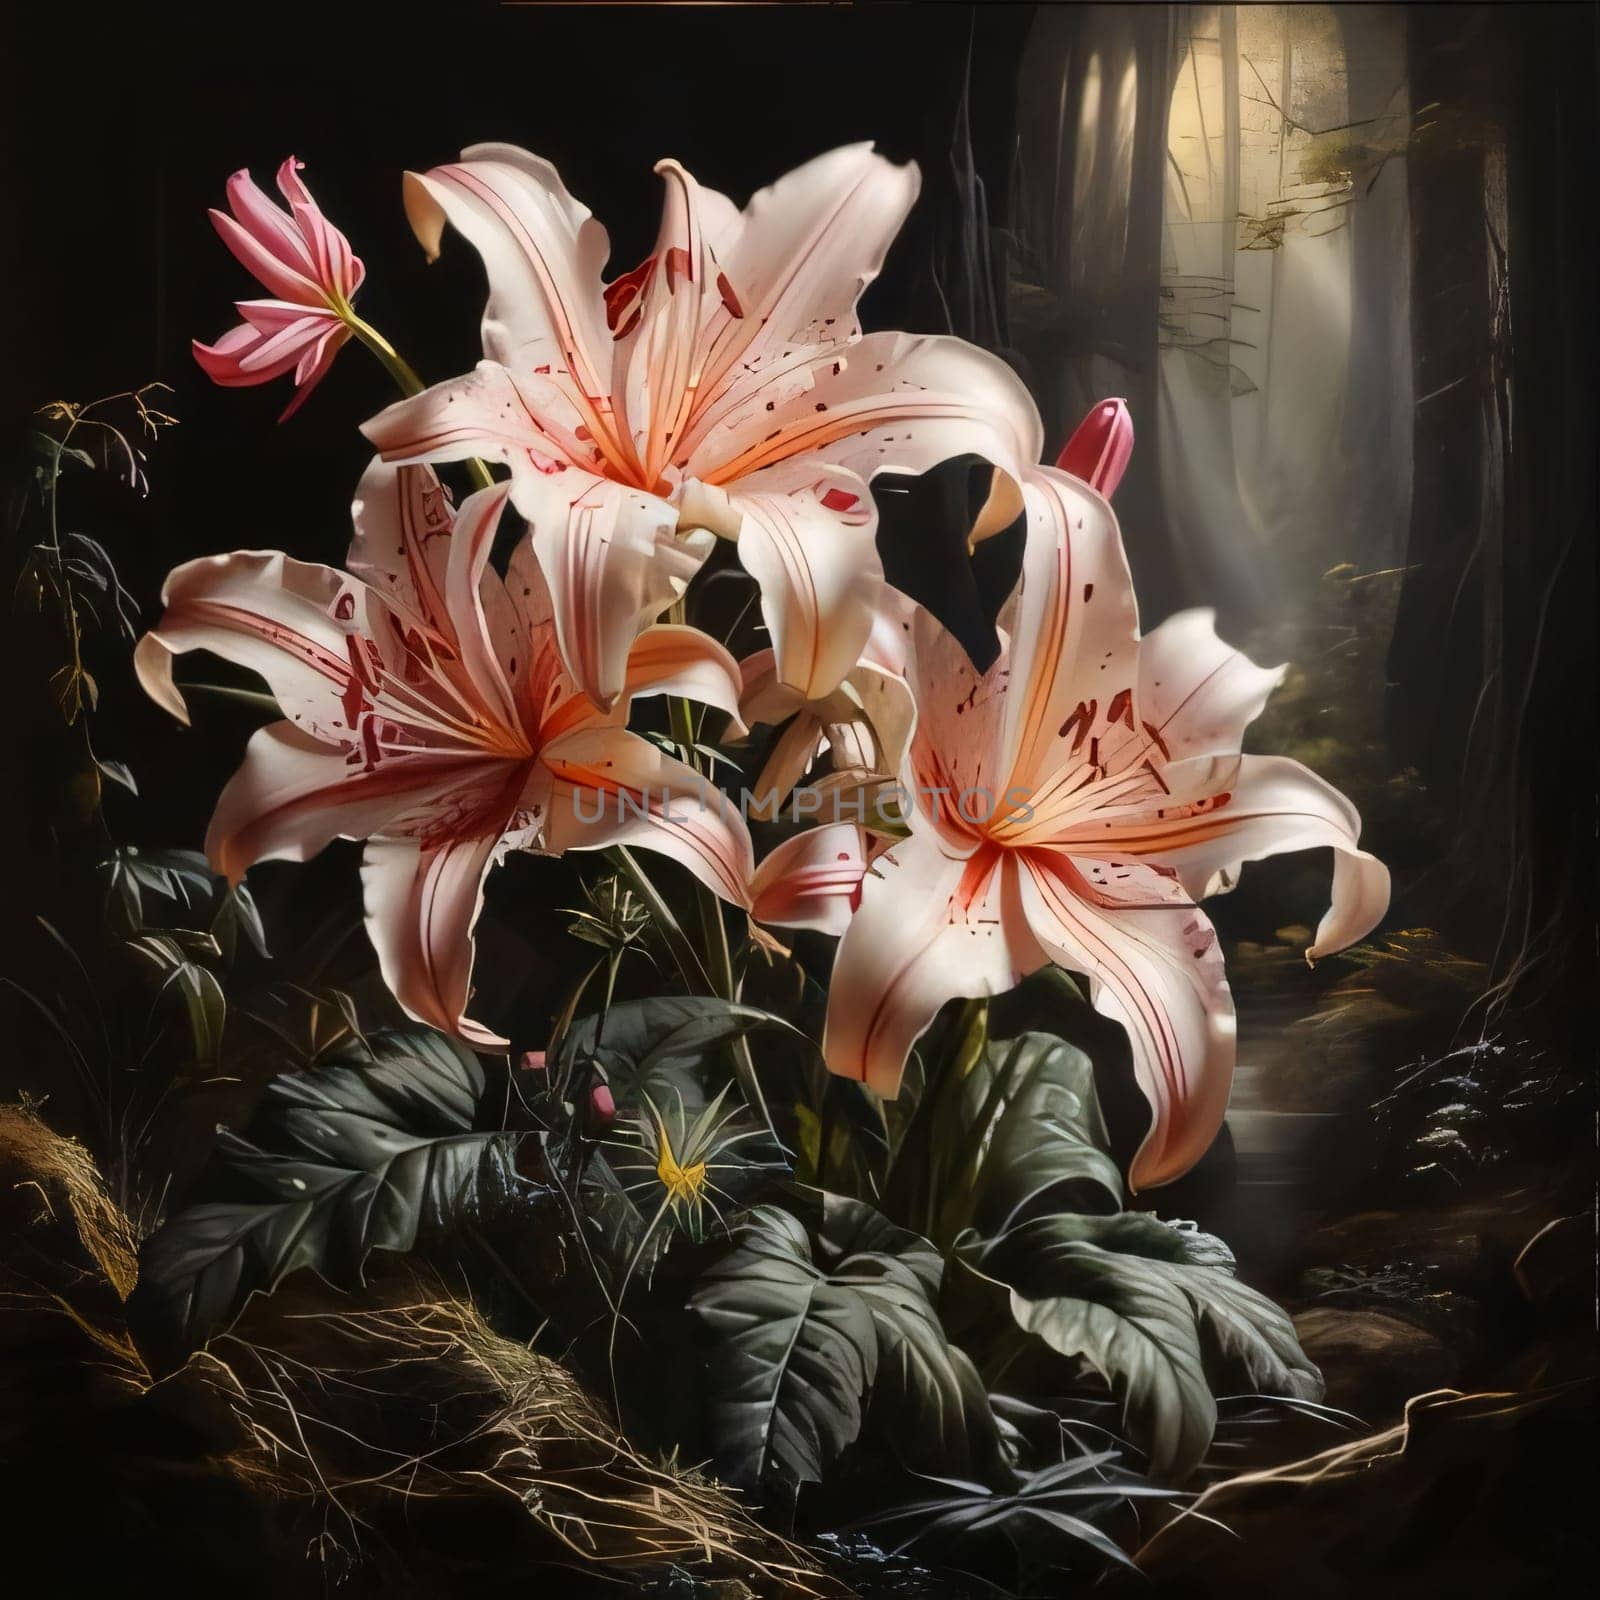 Illustration of pink lily flowers in the middle of a dark forest at night, in the sky, moonlight. Flowering flowers, a symbol of spring, new life. A joyful time of nature waking up to life.